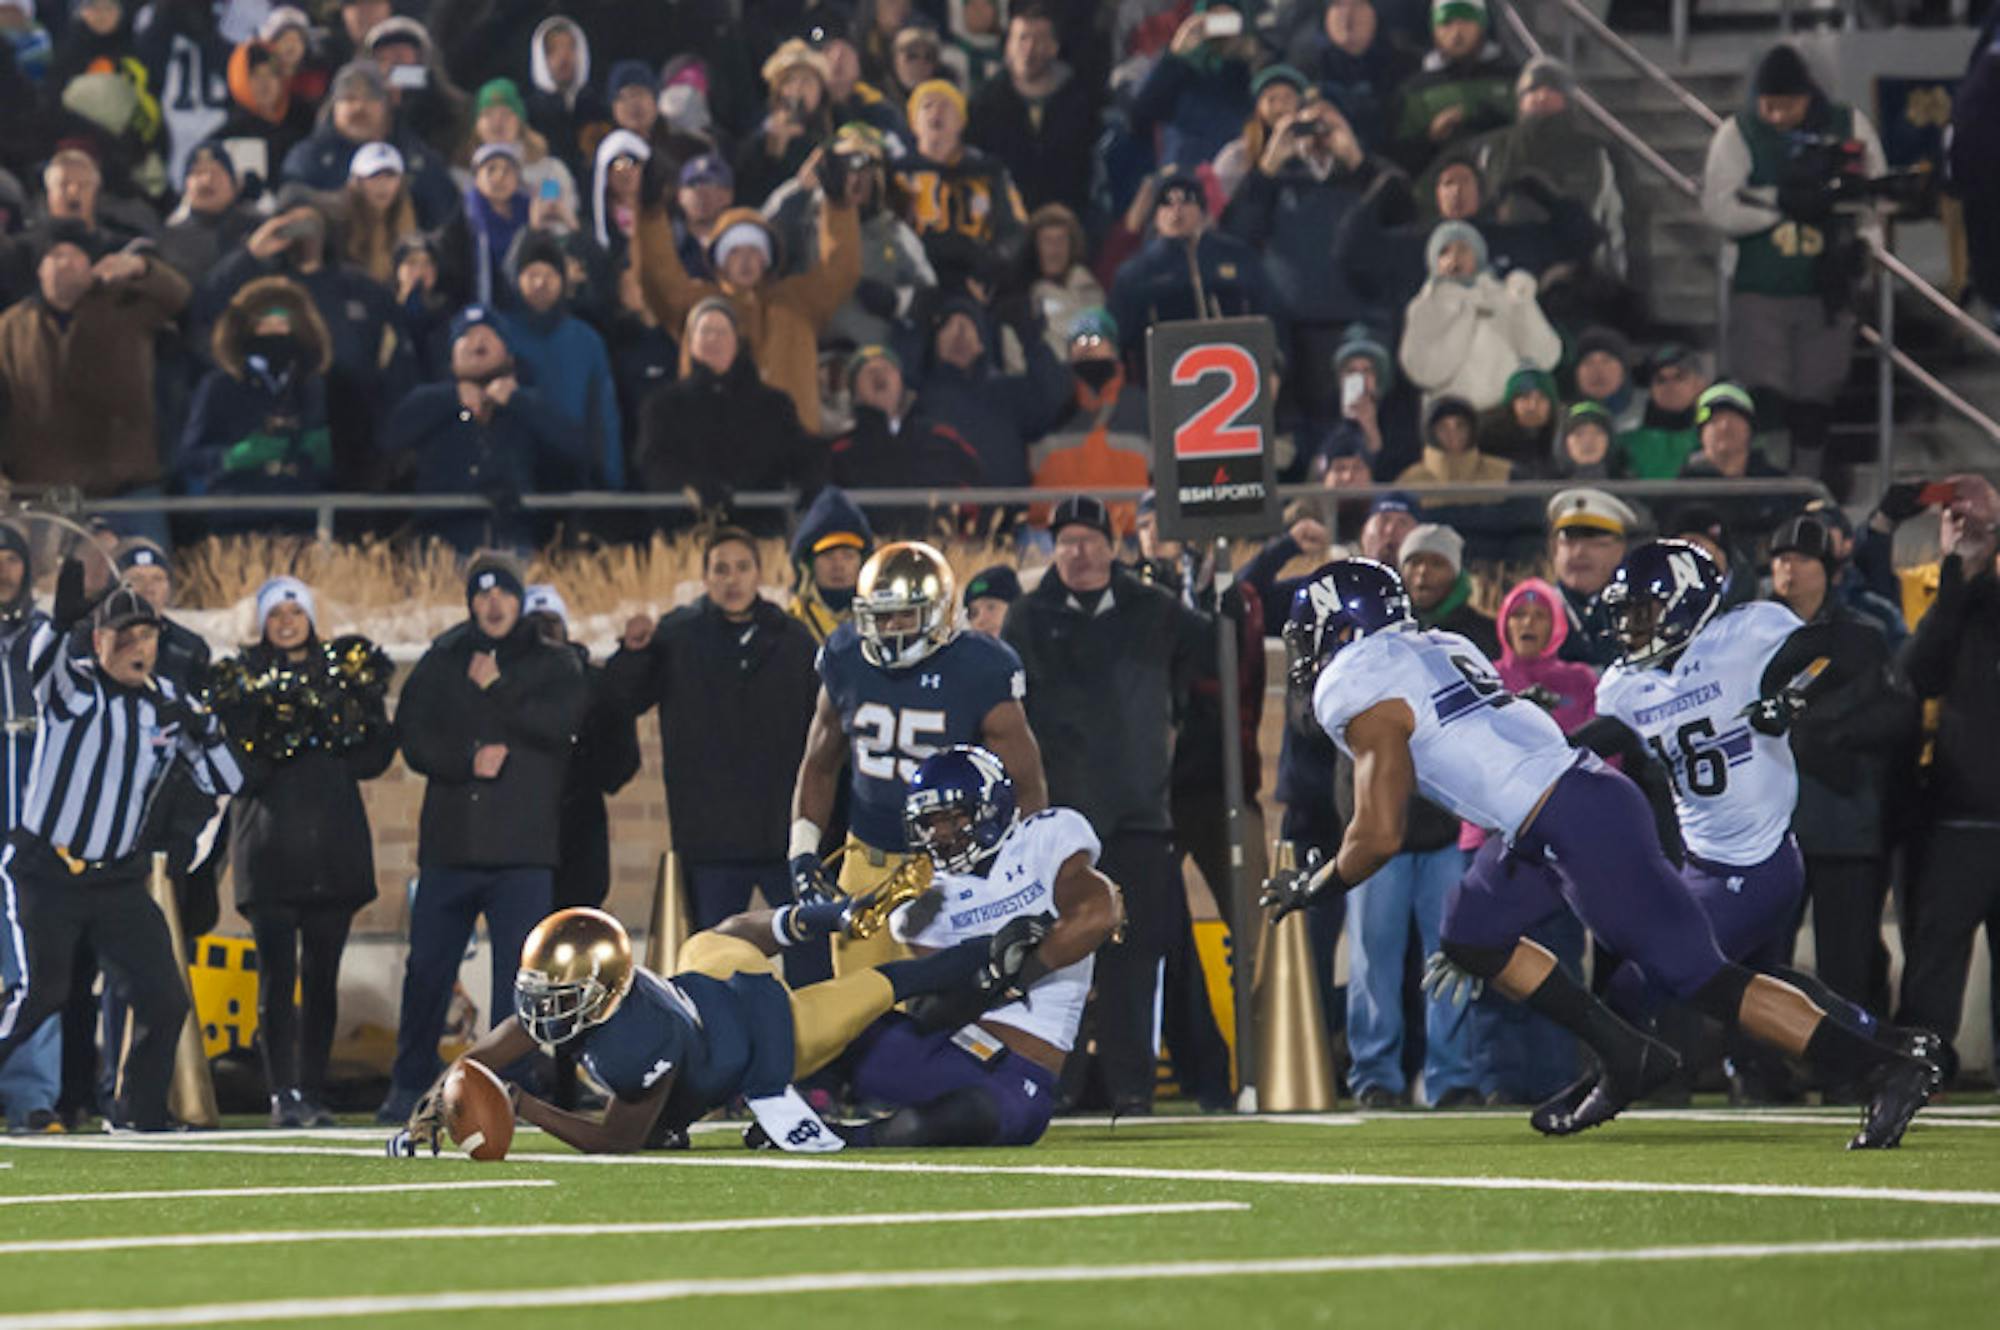 Irish junior receiver Chris Brown coughs up a fumble near the goal line during Notre Dame’s 43-40 overtime loss to Northwestern on Saturday at Notre Dame Stadium.